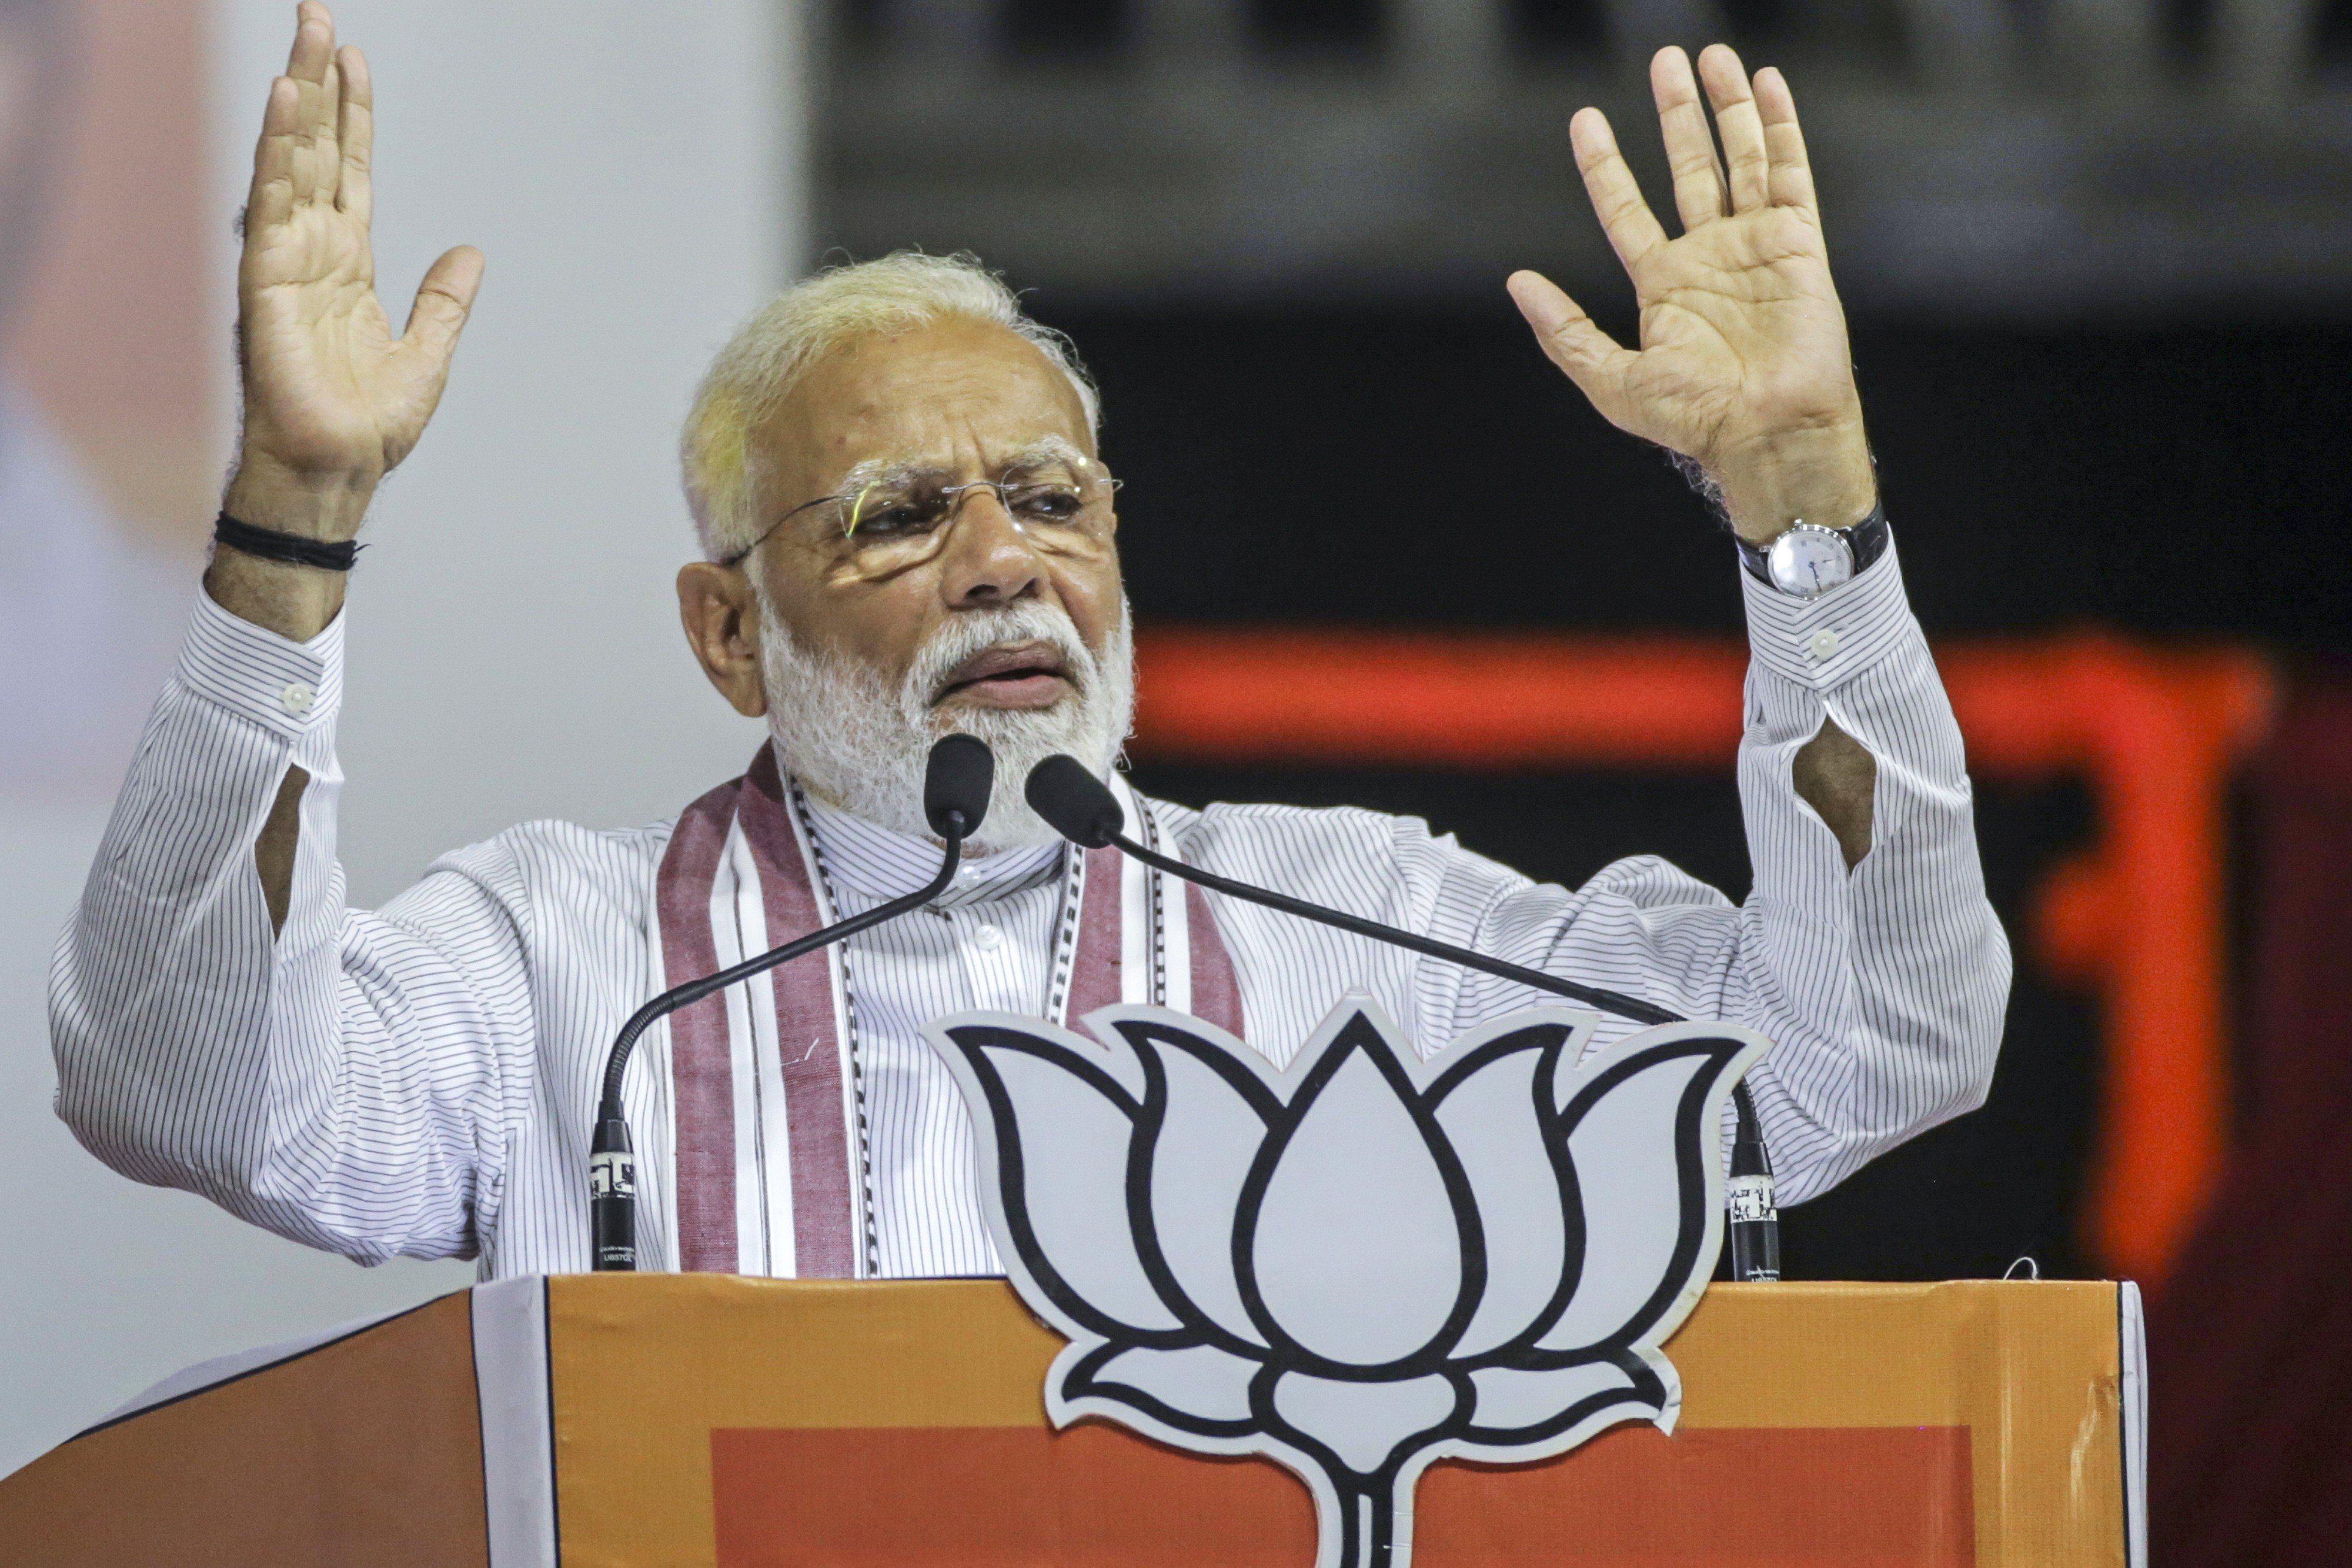 Indian Prime Minister Narendra Modi speaks during a rally in Mumbai on April 26. Modi's Bharatiya Janata Party increased its already substantial majority in the recently completed elections, winning 303 out of 545 seats in the lower house of parliament. Photo: Bloomberg